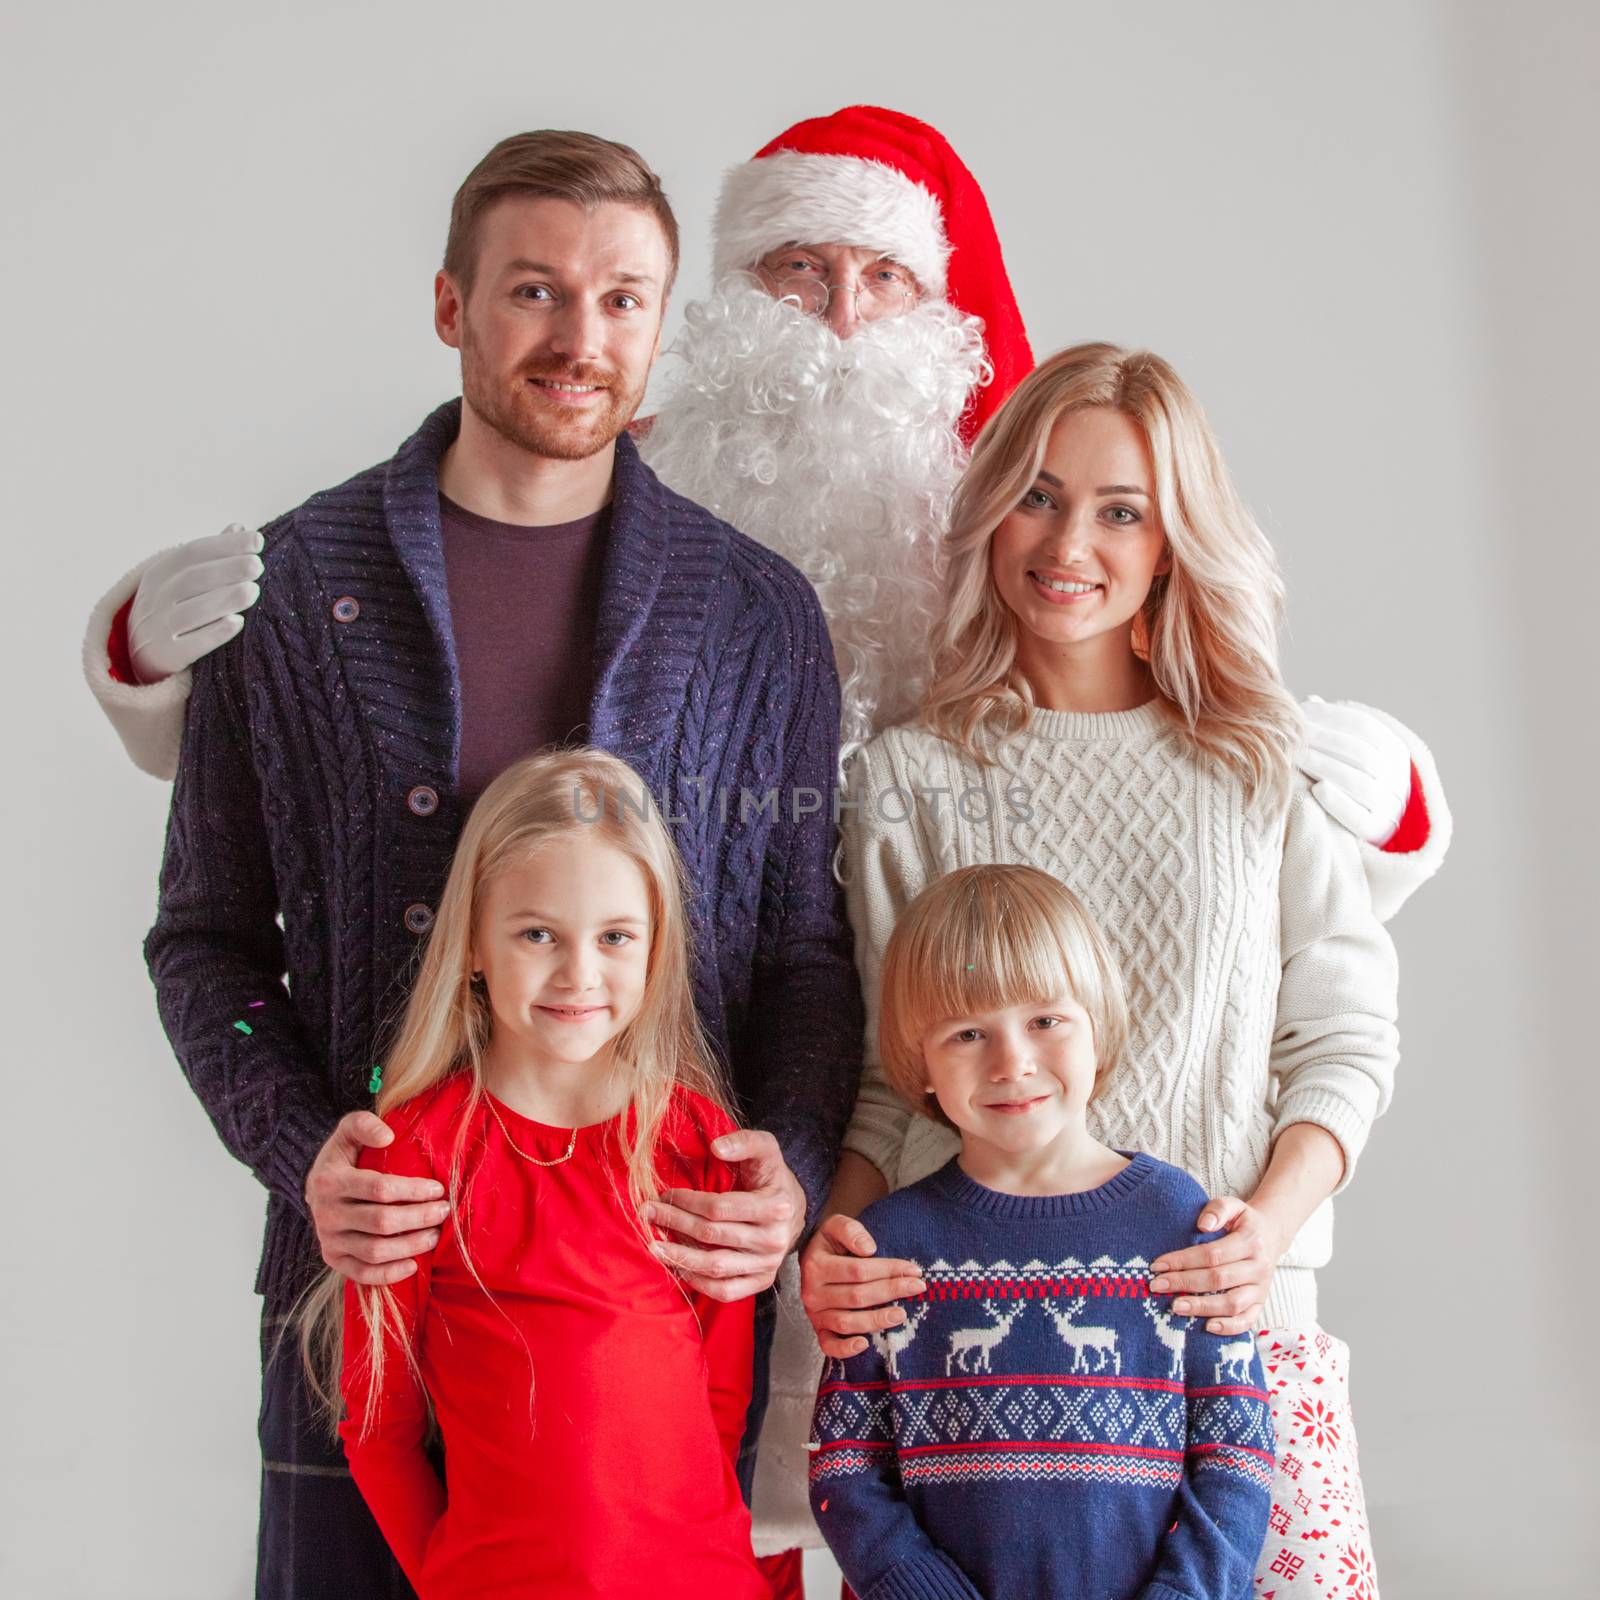 Christmas portrait of happy smiling family with two children and Santa Claus embracing them on gray background